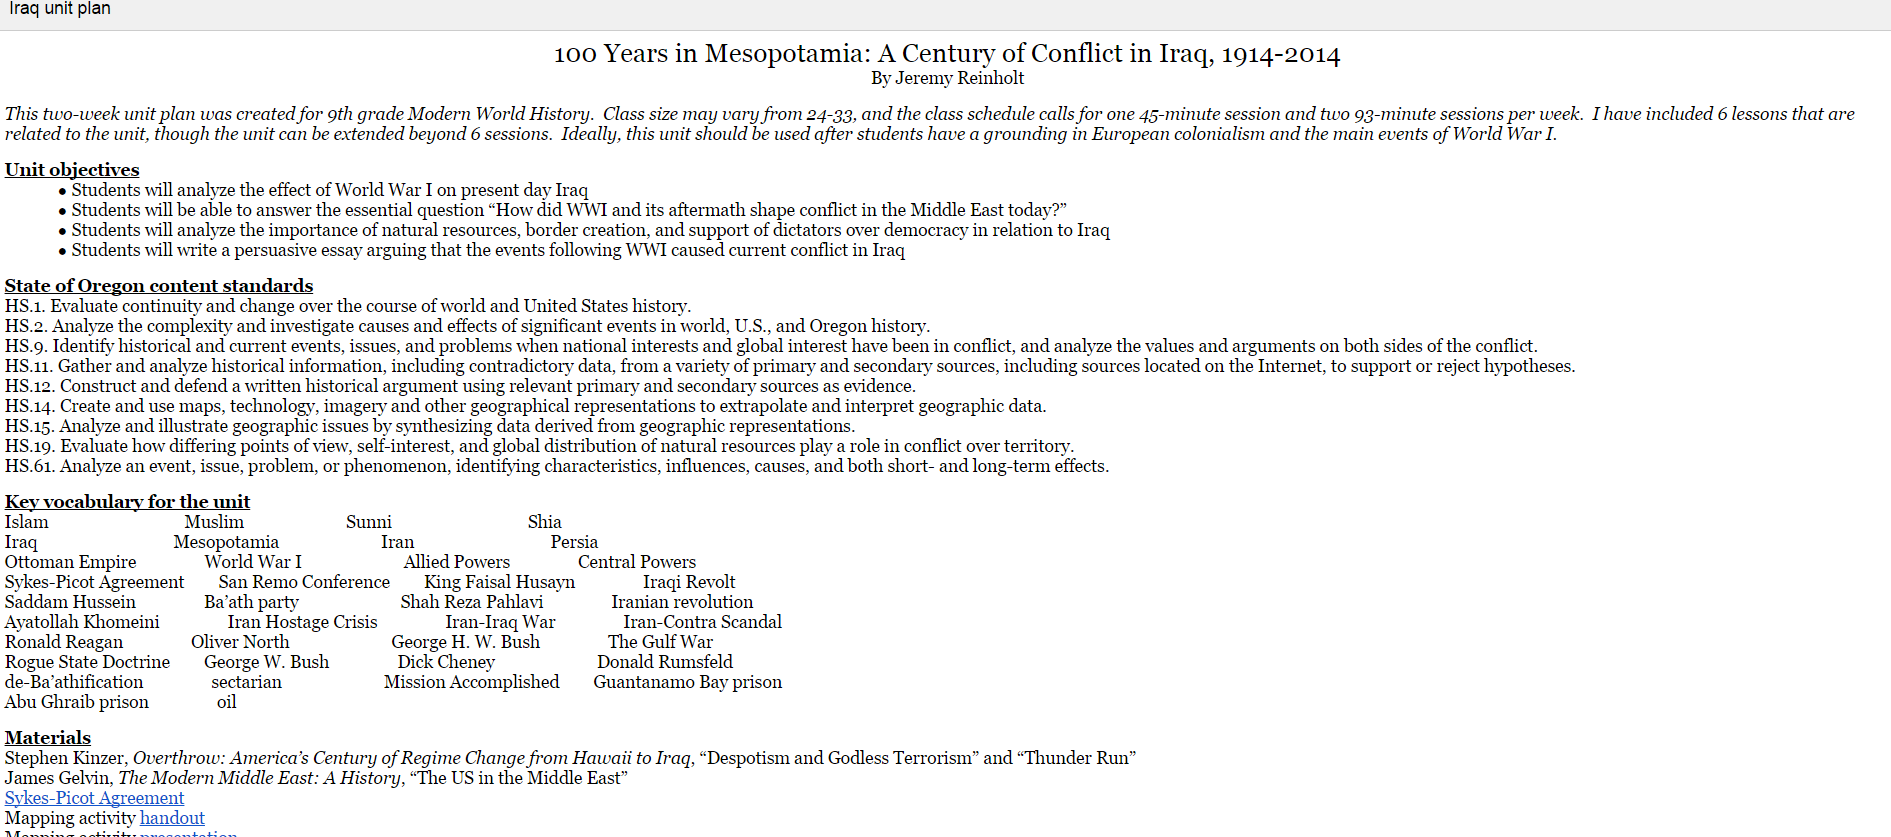 100 Years in Mesopotamia: A Century of Conflict in Iraq, 1914-2014